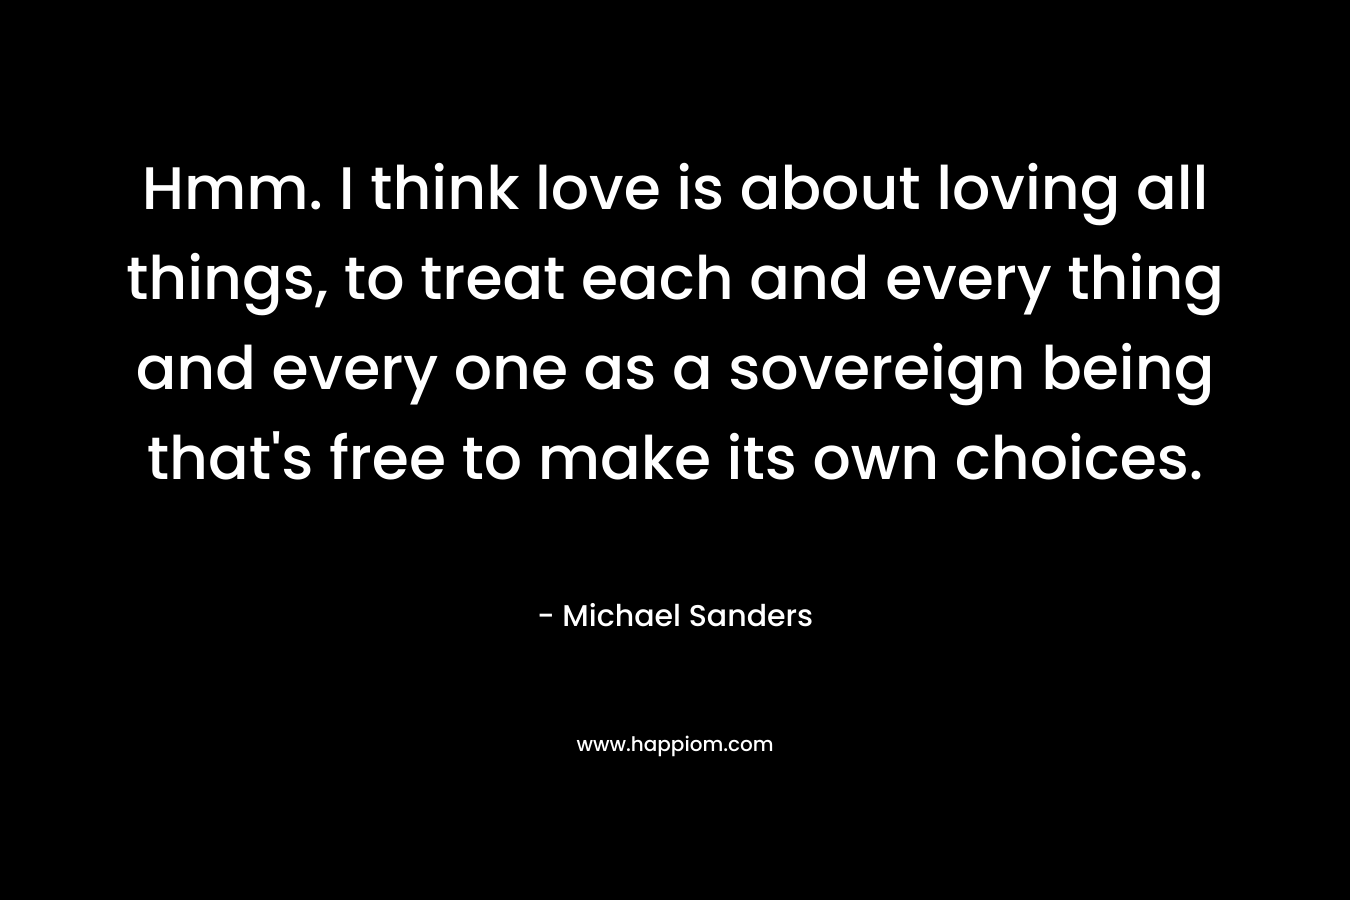 Hmm. I think love is about loving all things, to treat each and every thing and every one as a sovereign being that's free to make its own choices.